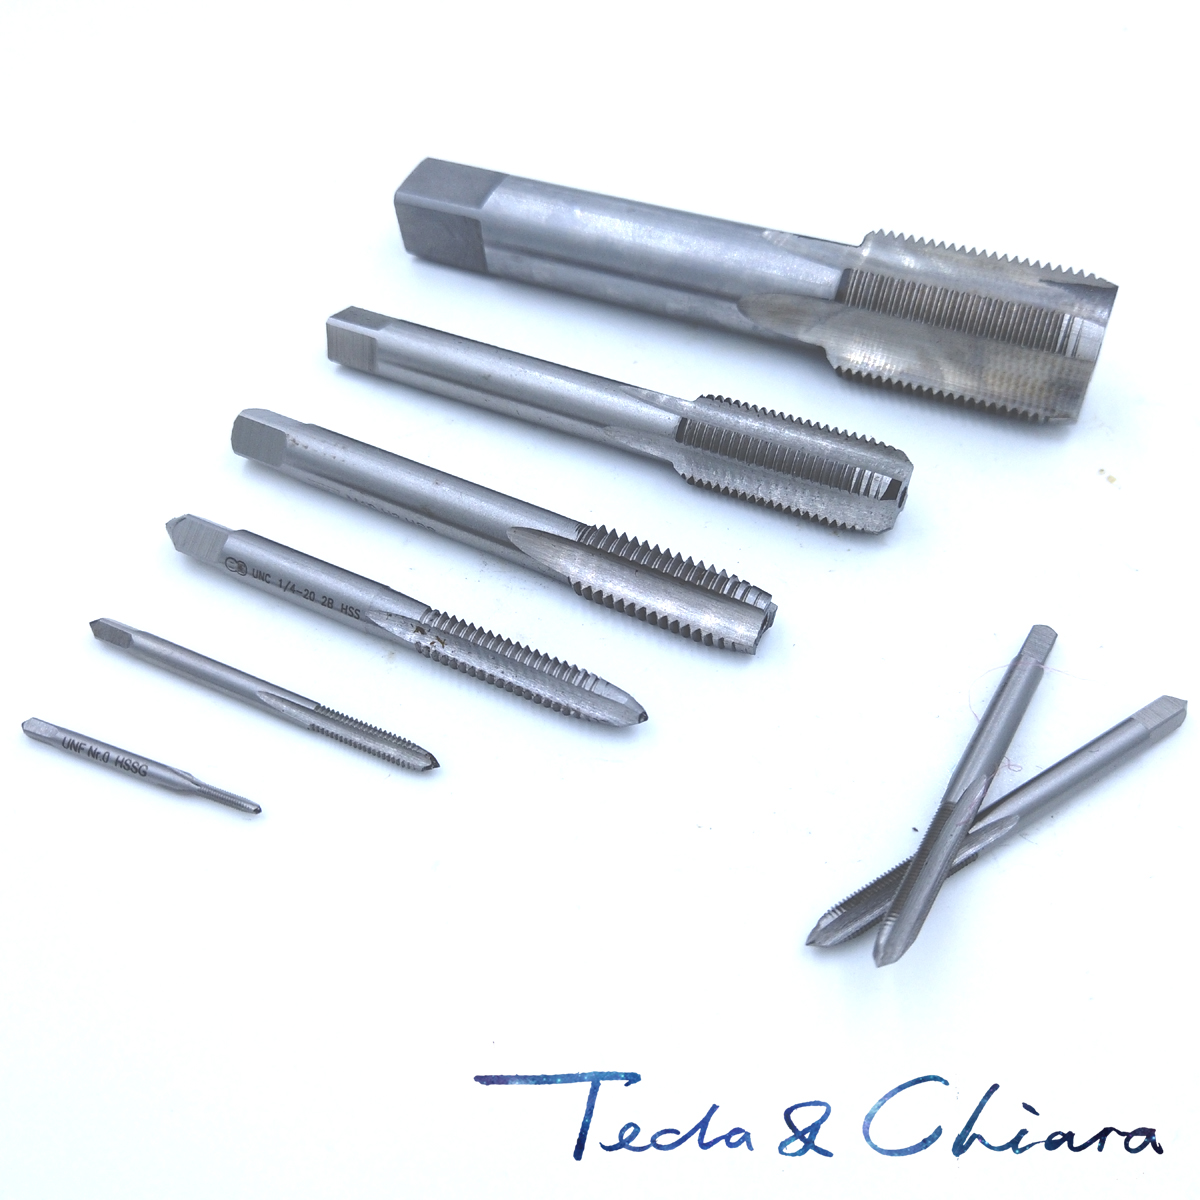 7/8-9 7/8-10 7/8-12 7/8-14 UNC UNS UN UNF HSS Right Hand Tap TPI Threading Tools For Mold Machining 7/8 7/8" - 9 10 12 14